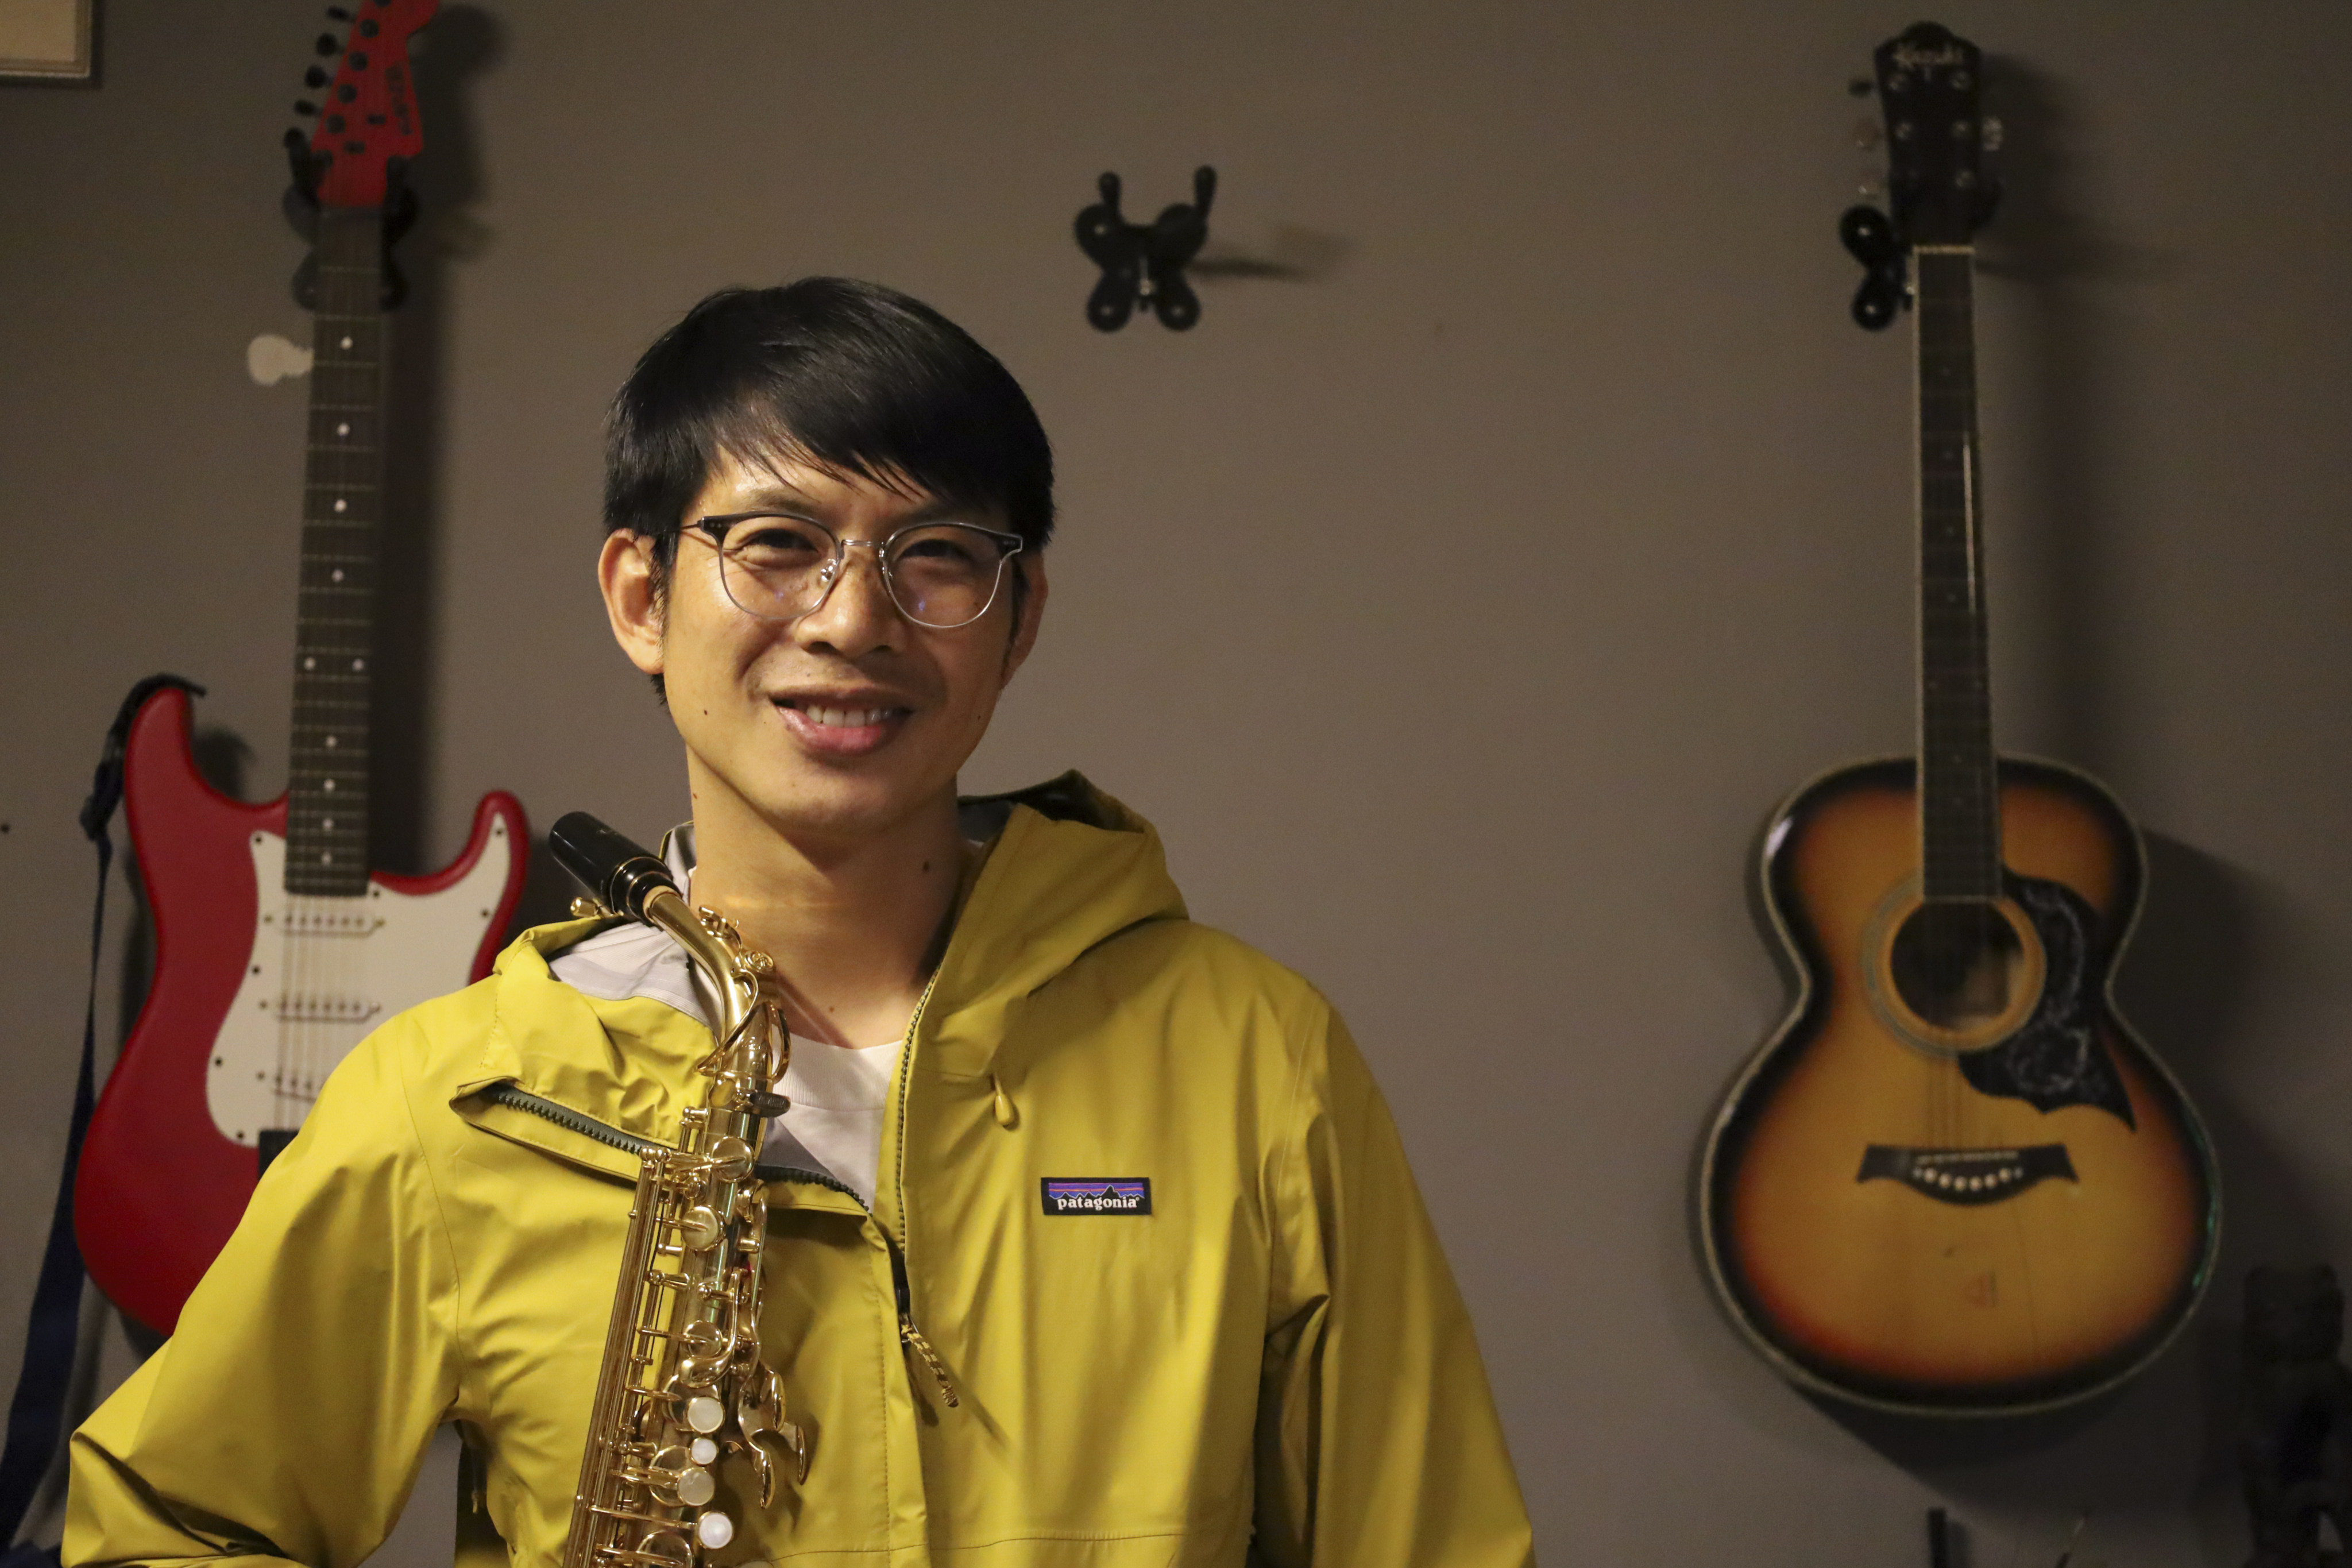 Chiang Mai native Pharadon Phonamnuai picked up the saxophone as a teen and busked around the world. He’s written a book about his travels, and now owns a jazz club in his home city. Photo: Thomas Bird